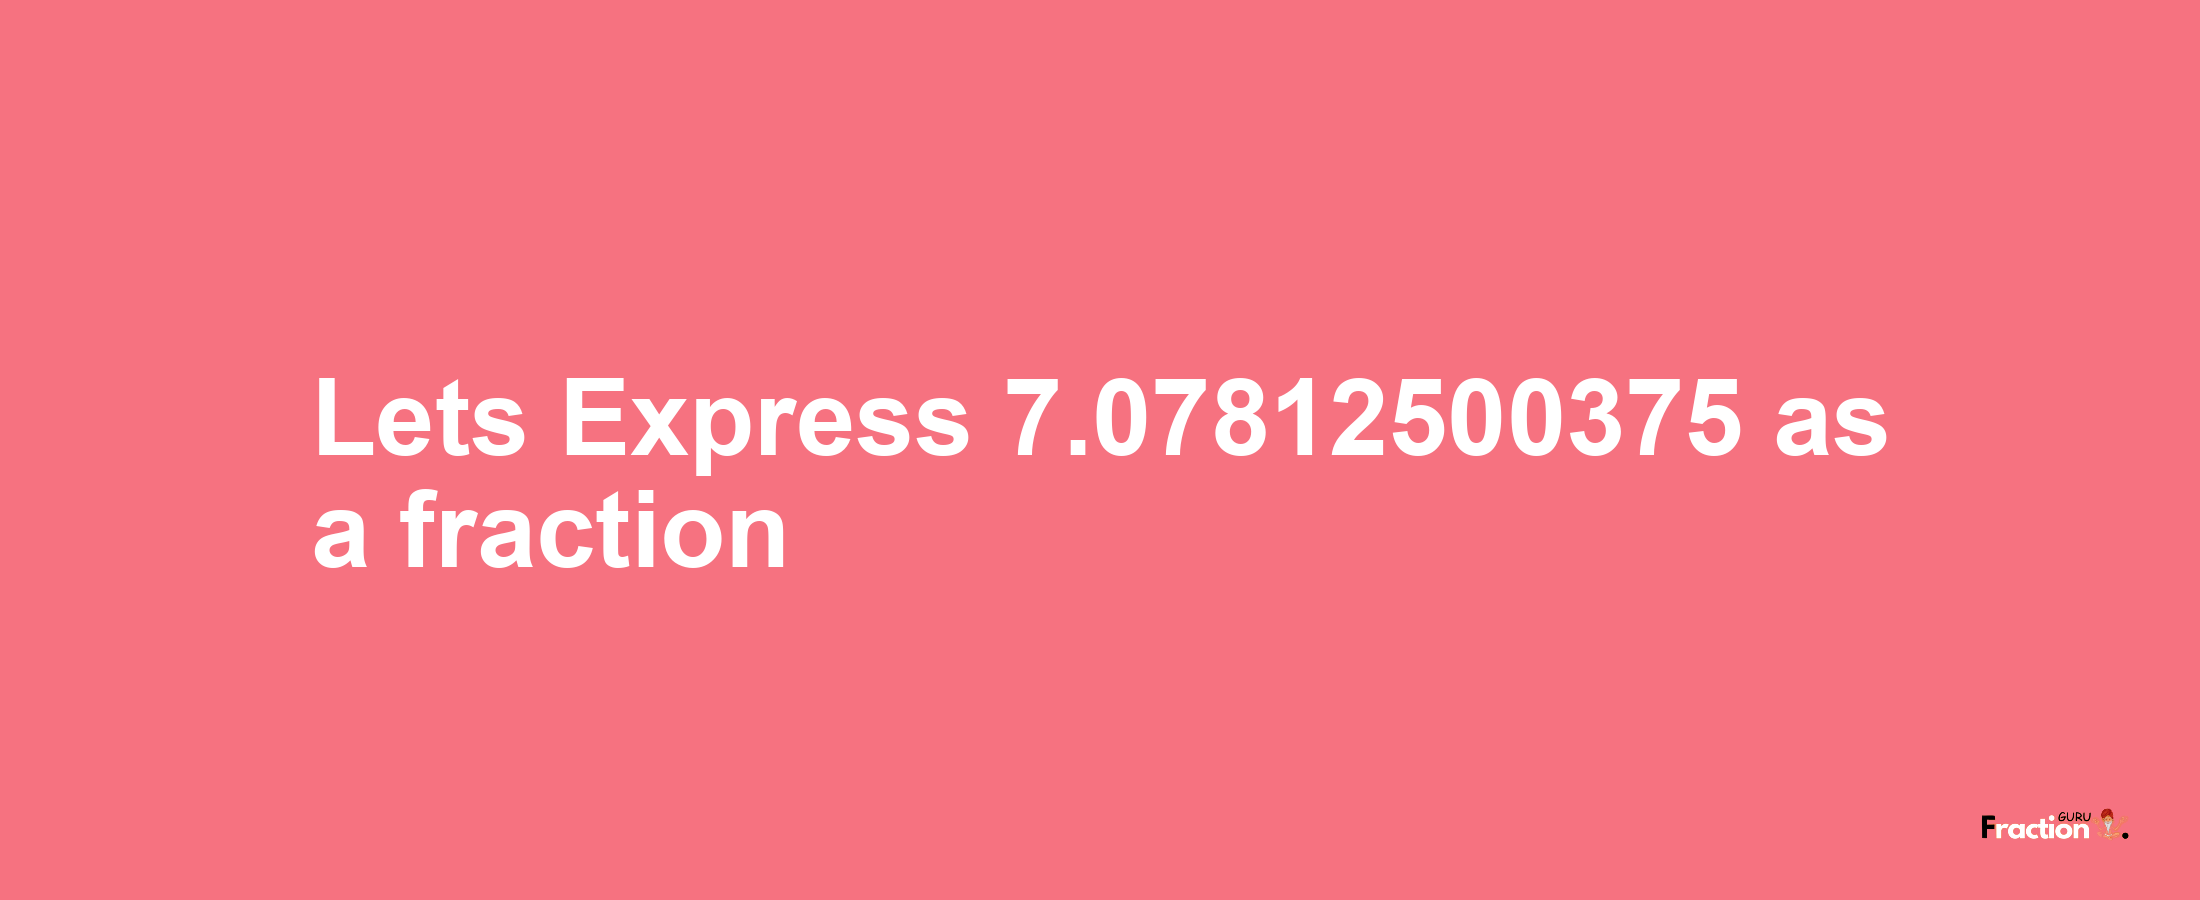 Lets Express 7.07812500375 as afraction